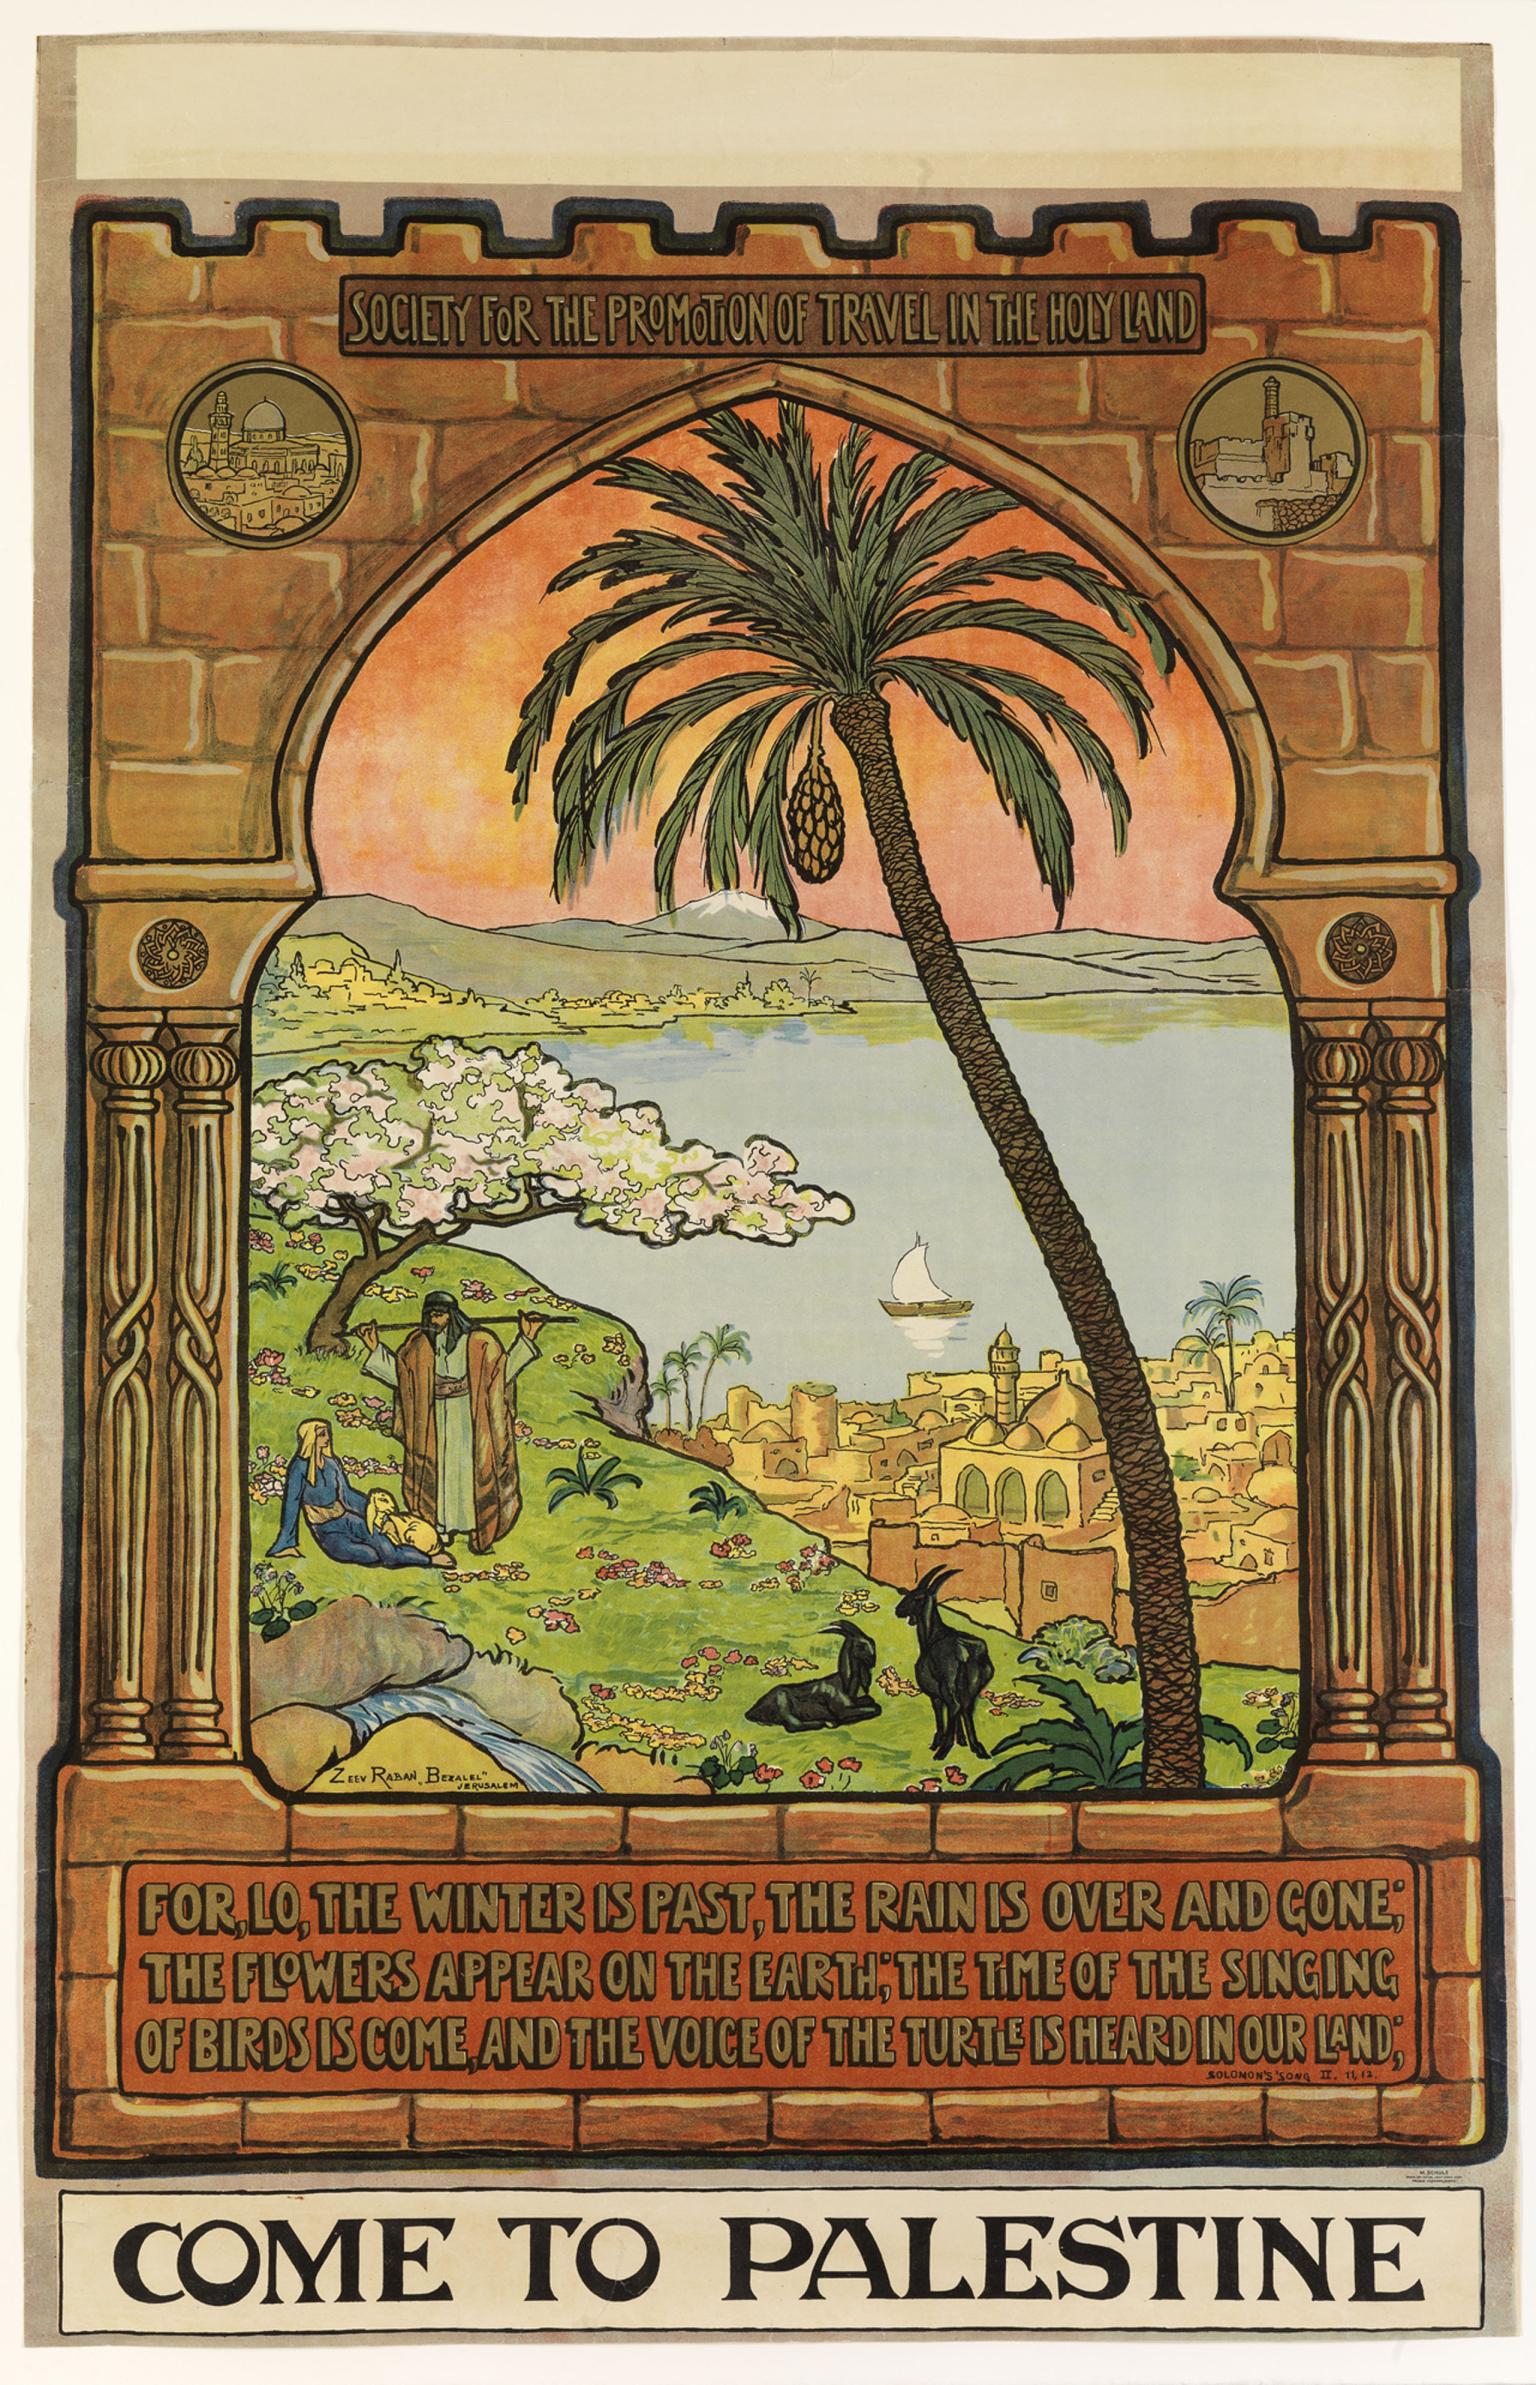 Poster of landscape with men and animals on a grassy hill overlooking a city, body of water, and mountains.